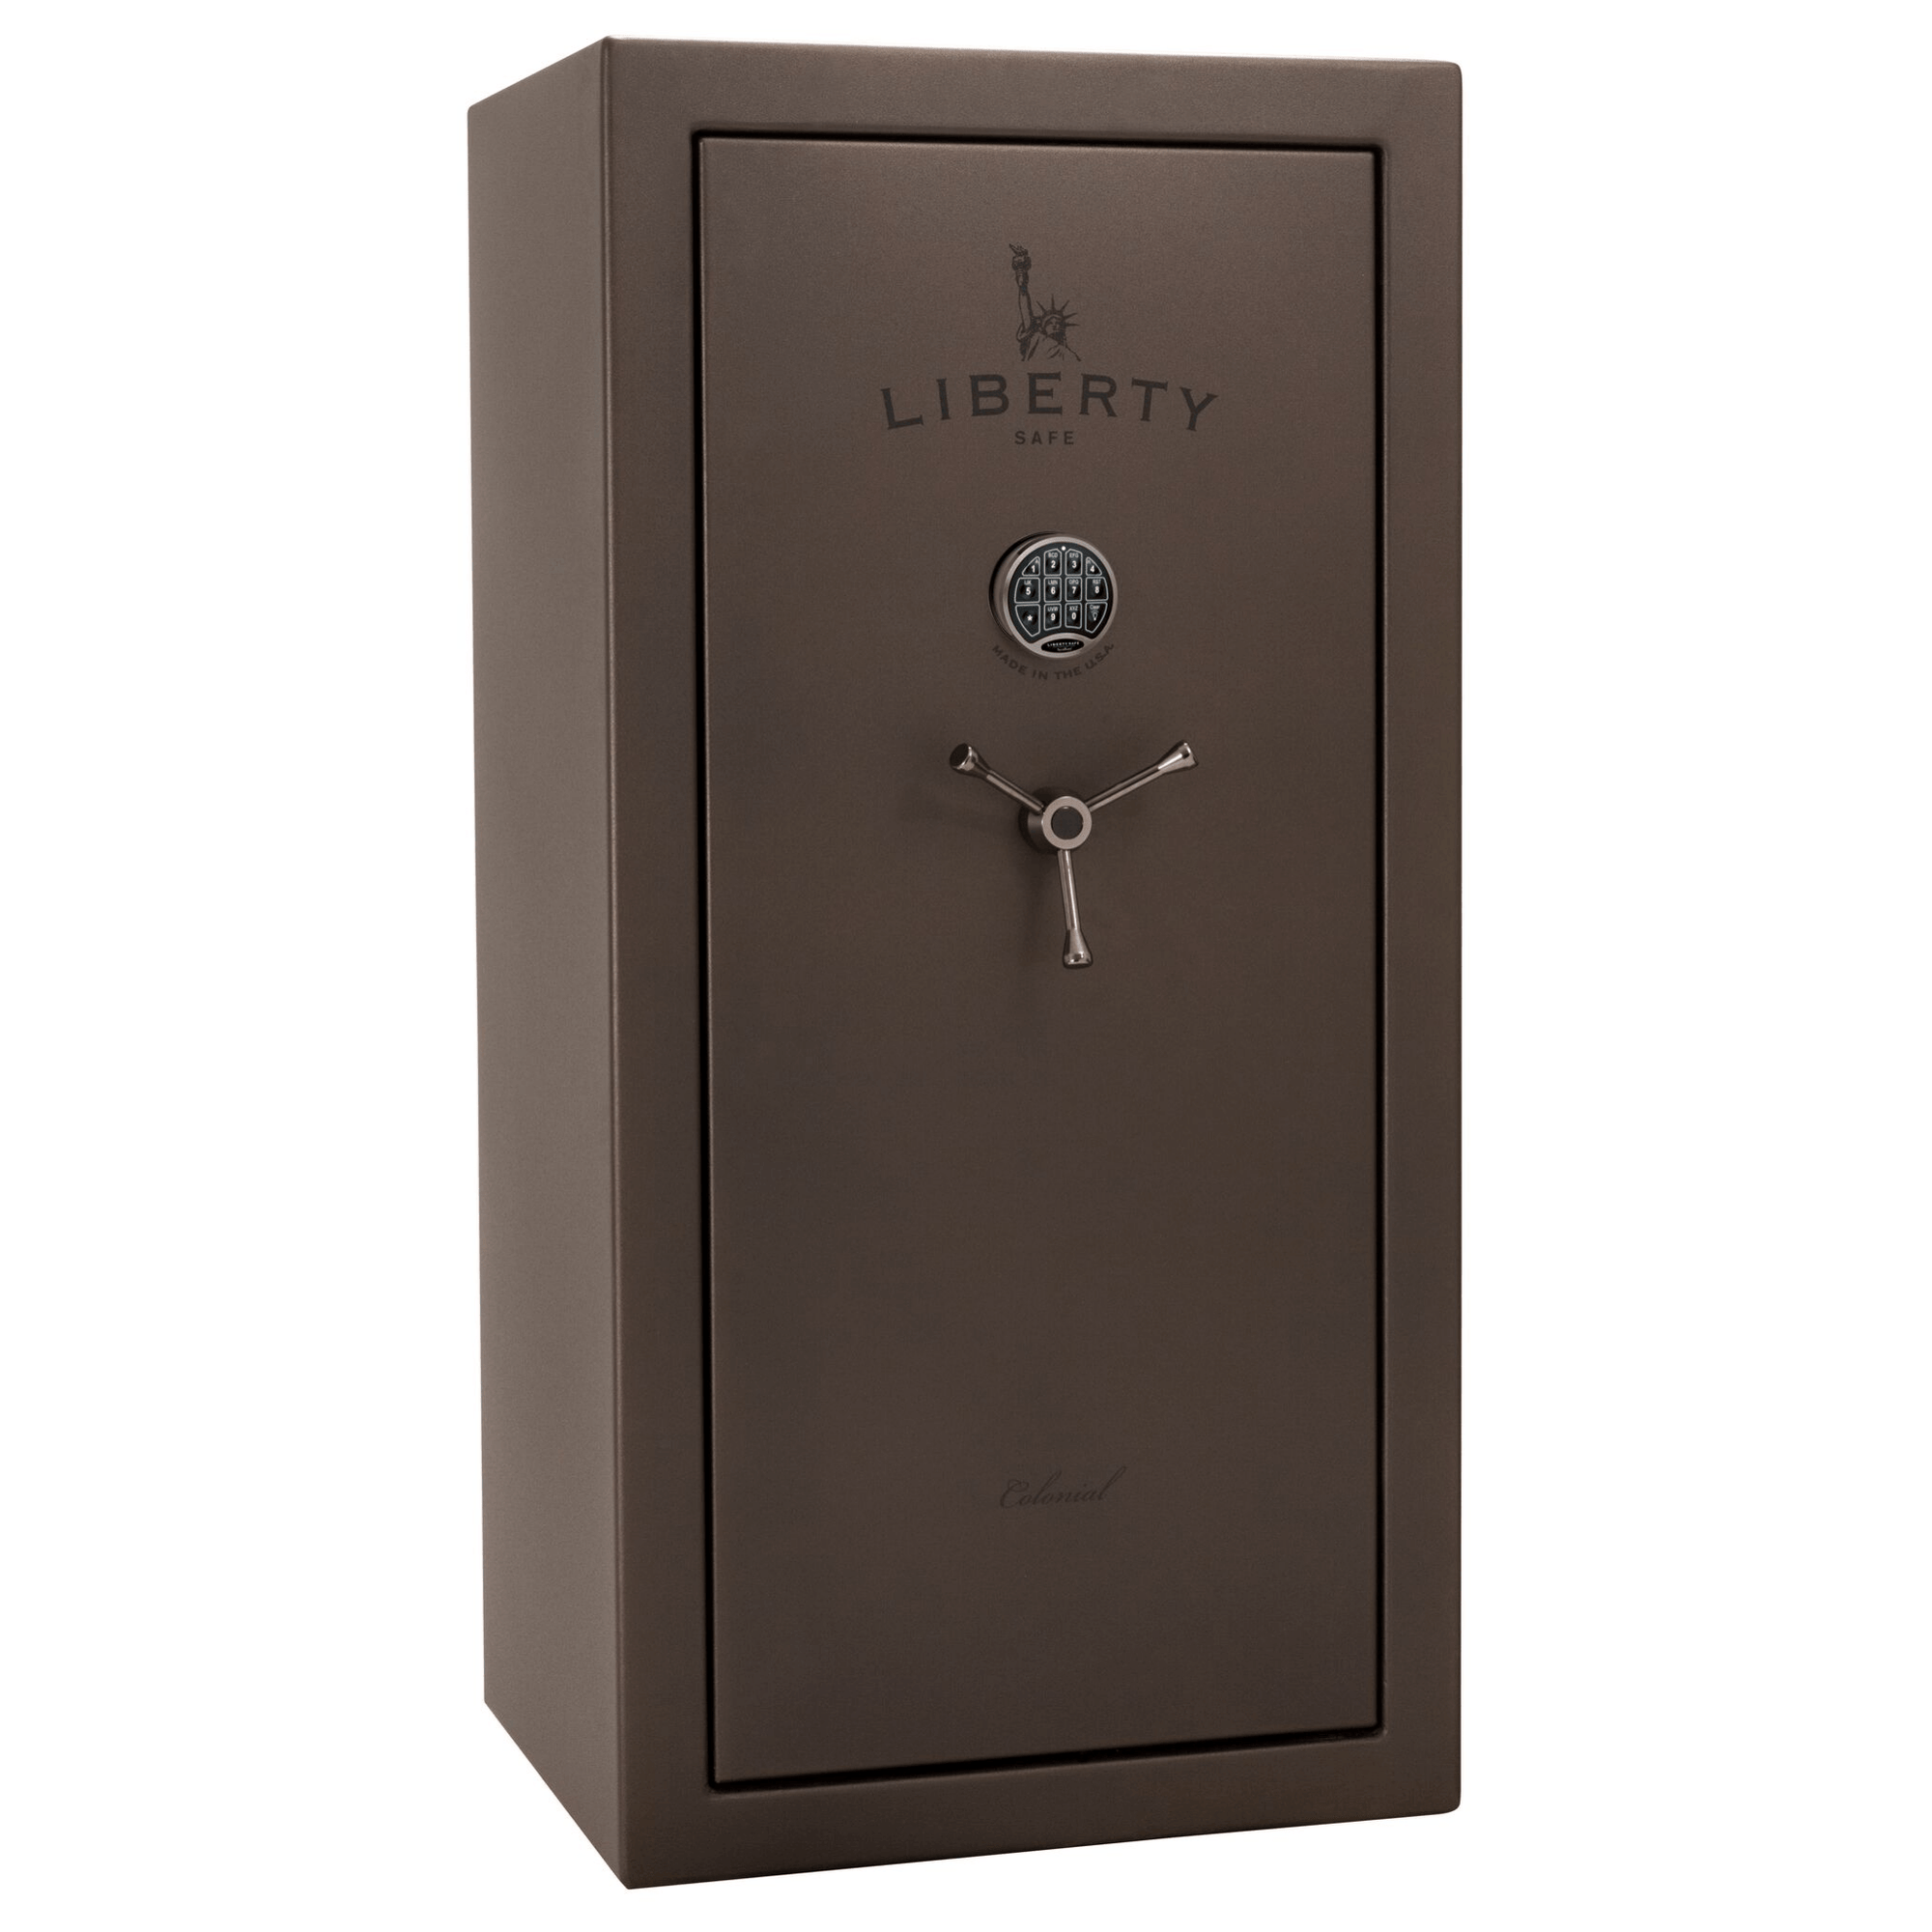 Liberty Colonial 23 Safe in Textured Bronze with Black Chrome Electronic Lock.